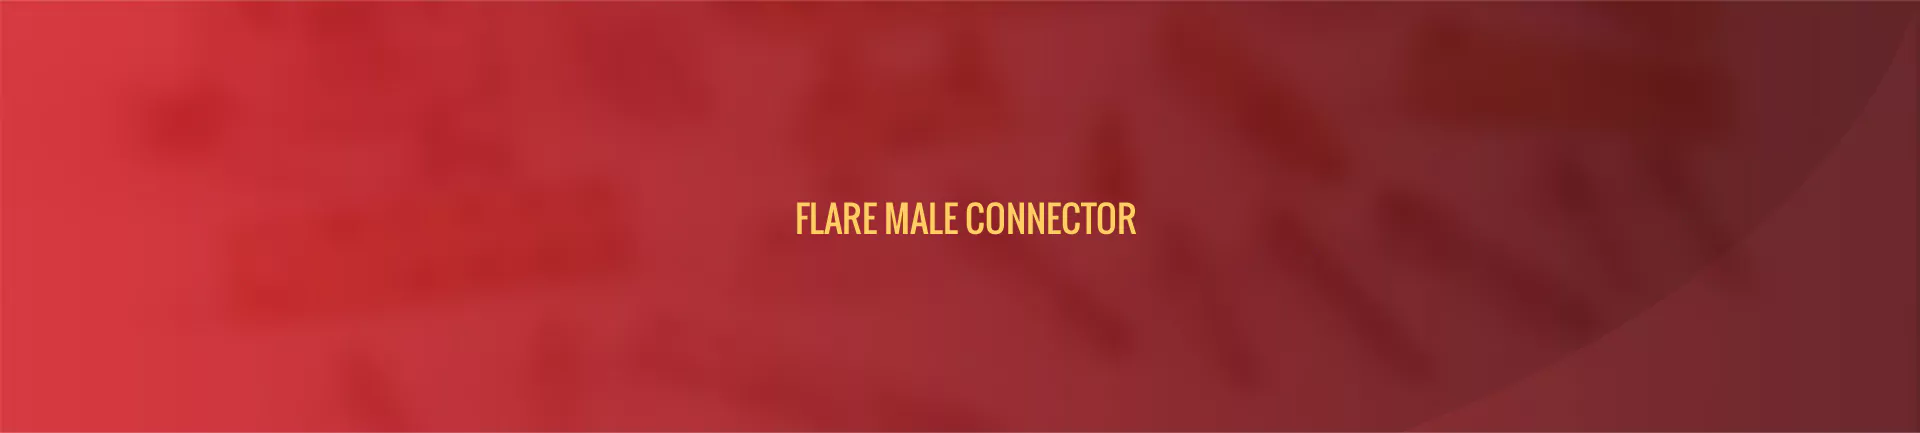 flare-male-connector-banner